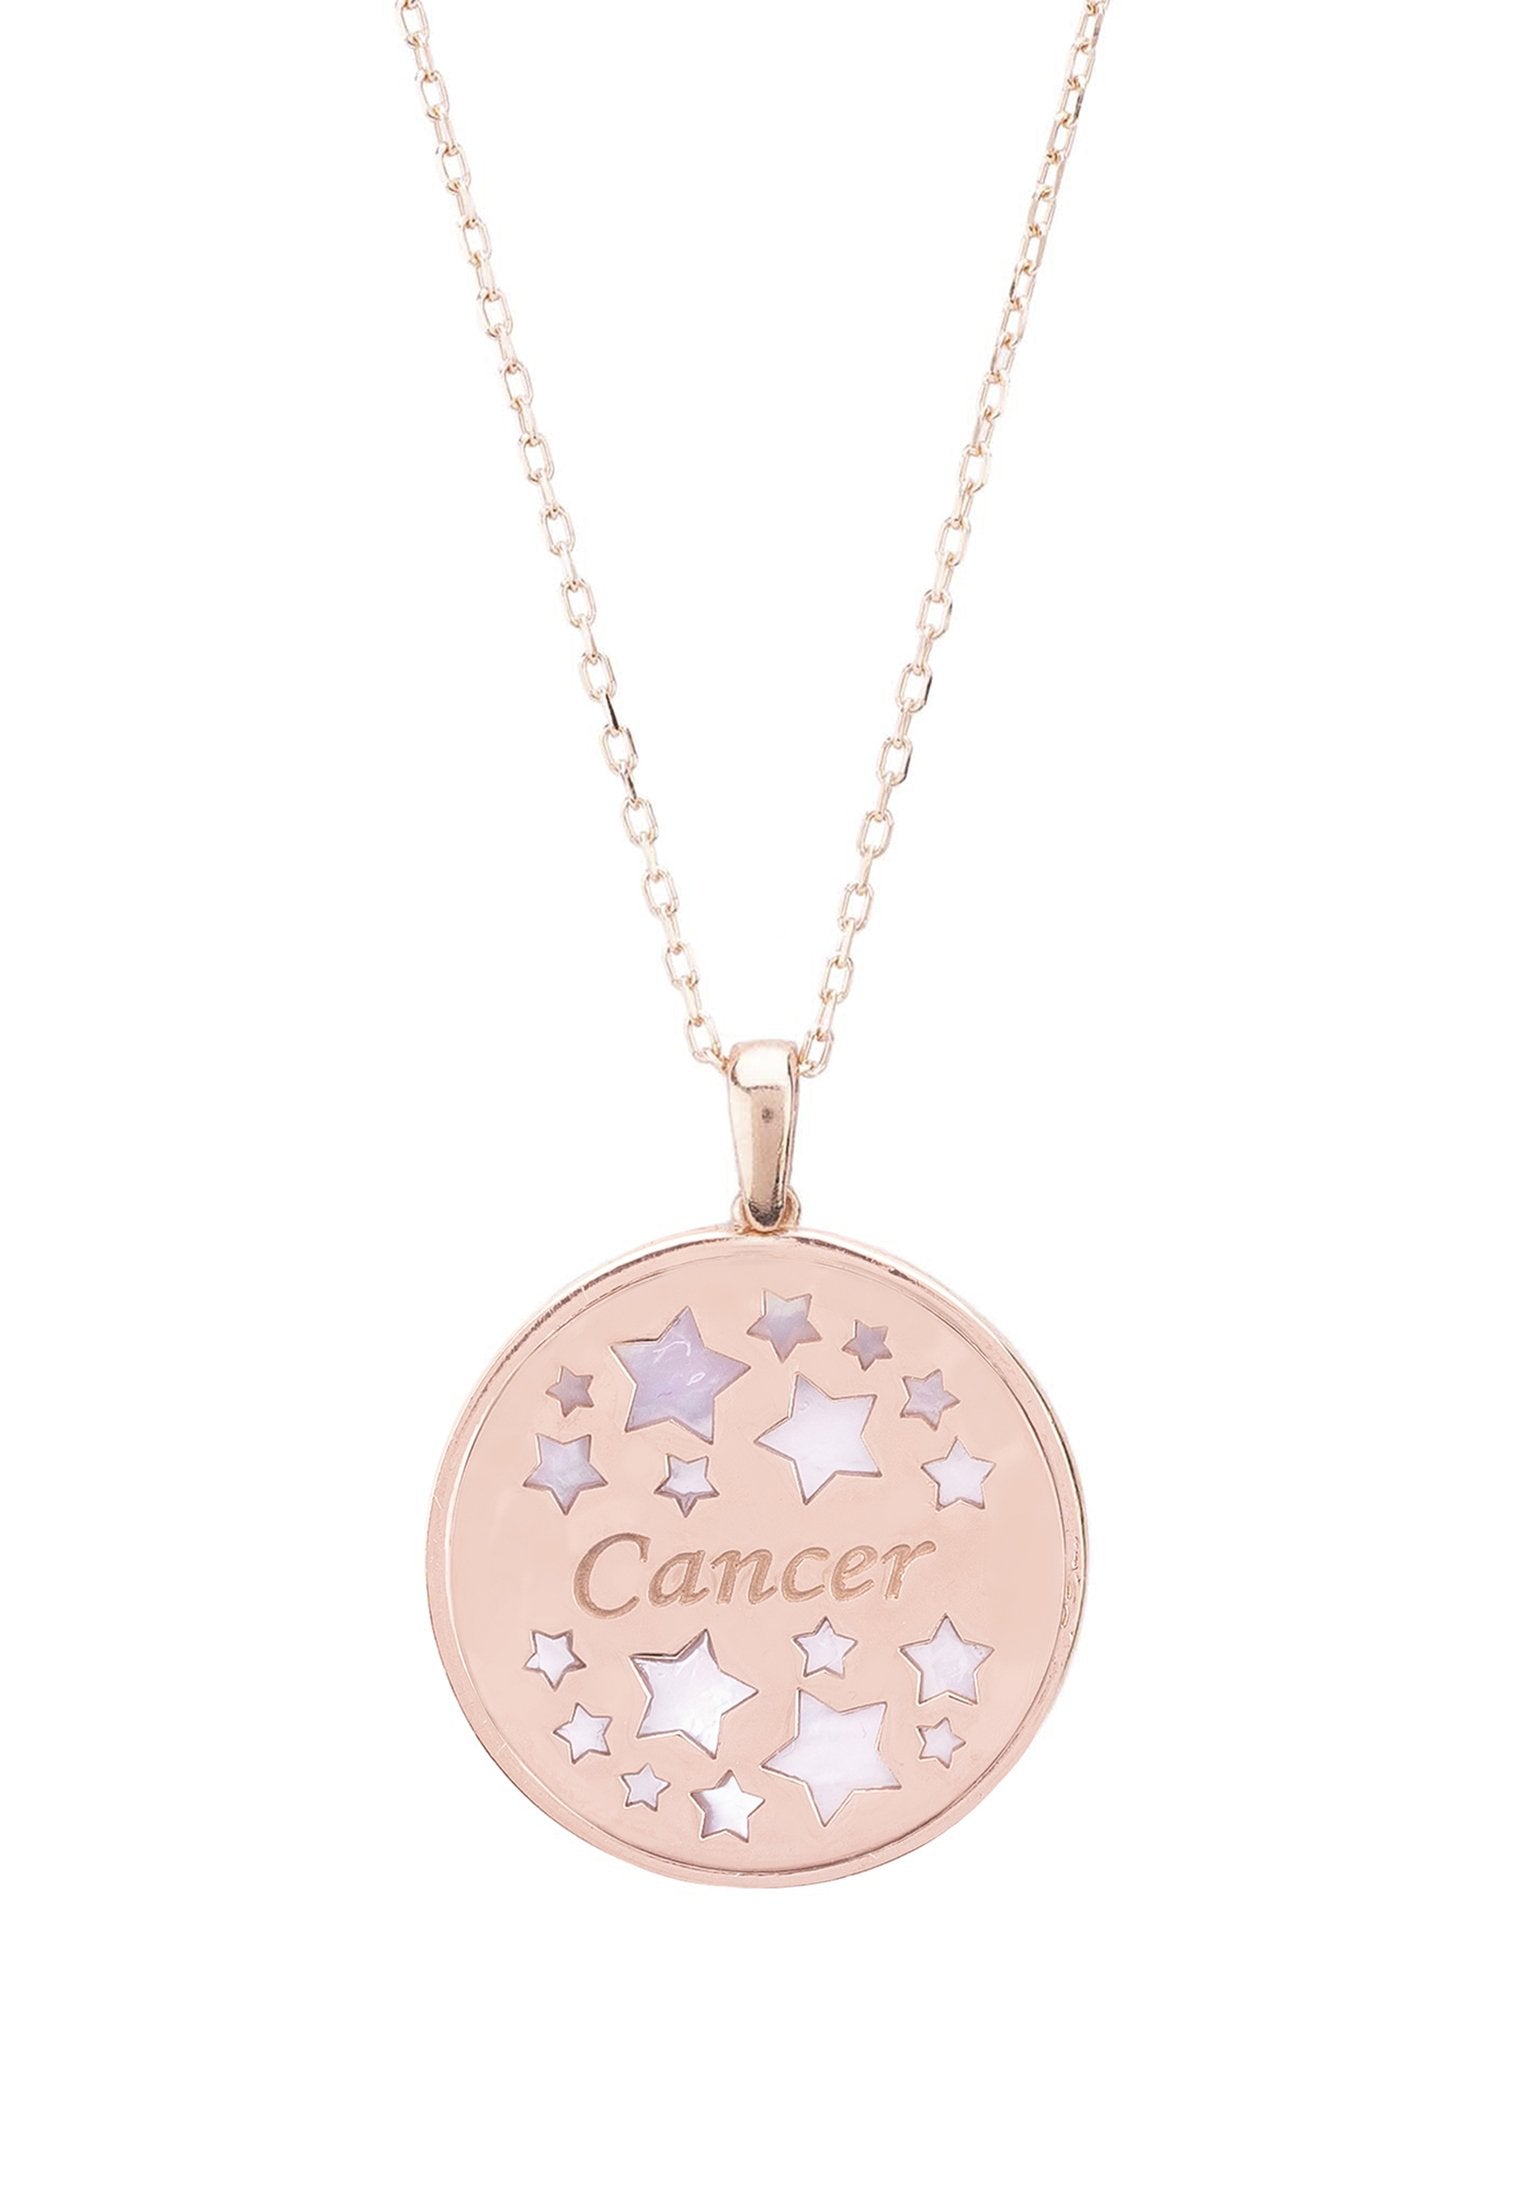 Zodiac Mother of Pearl Constellation Pendant Necklace - Cancer Birth Sign in Rose Gold with Cubic Zirconia - Jewelry & Watches - Bijou Her -  -  - 